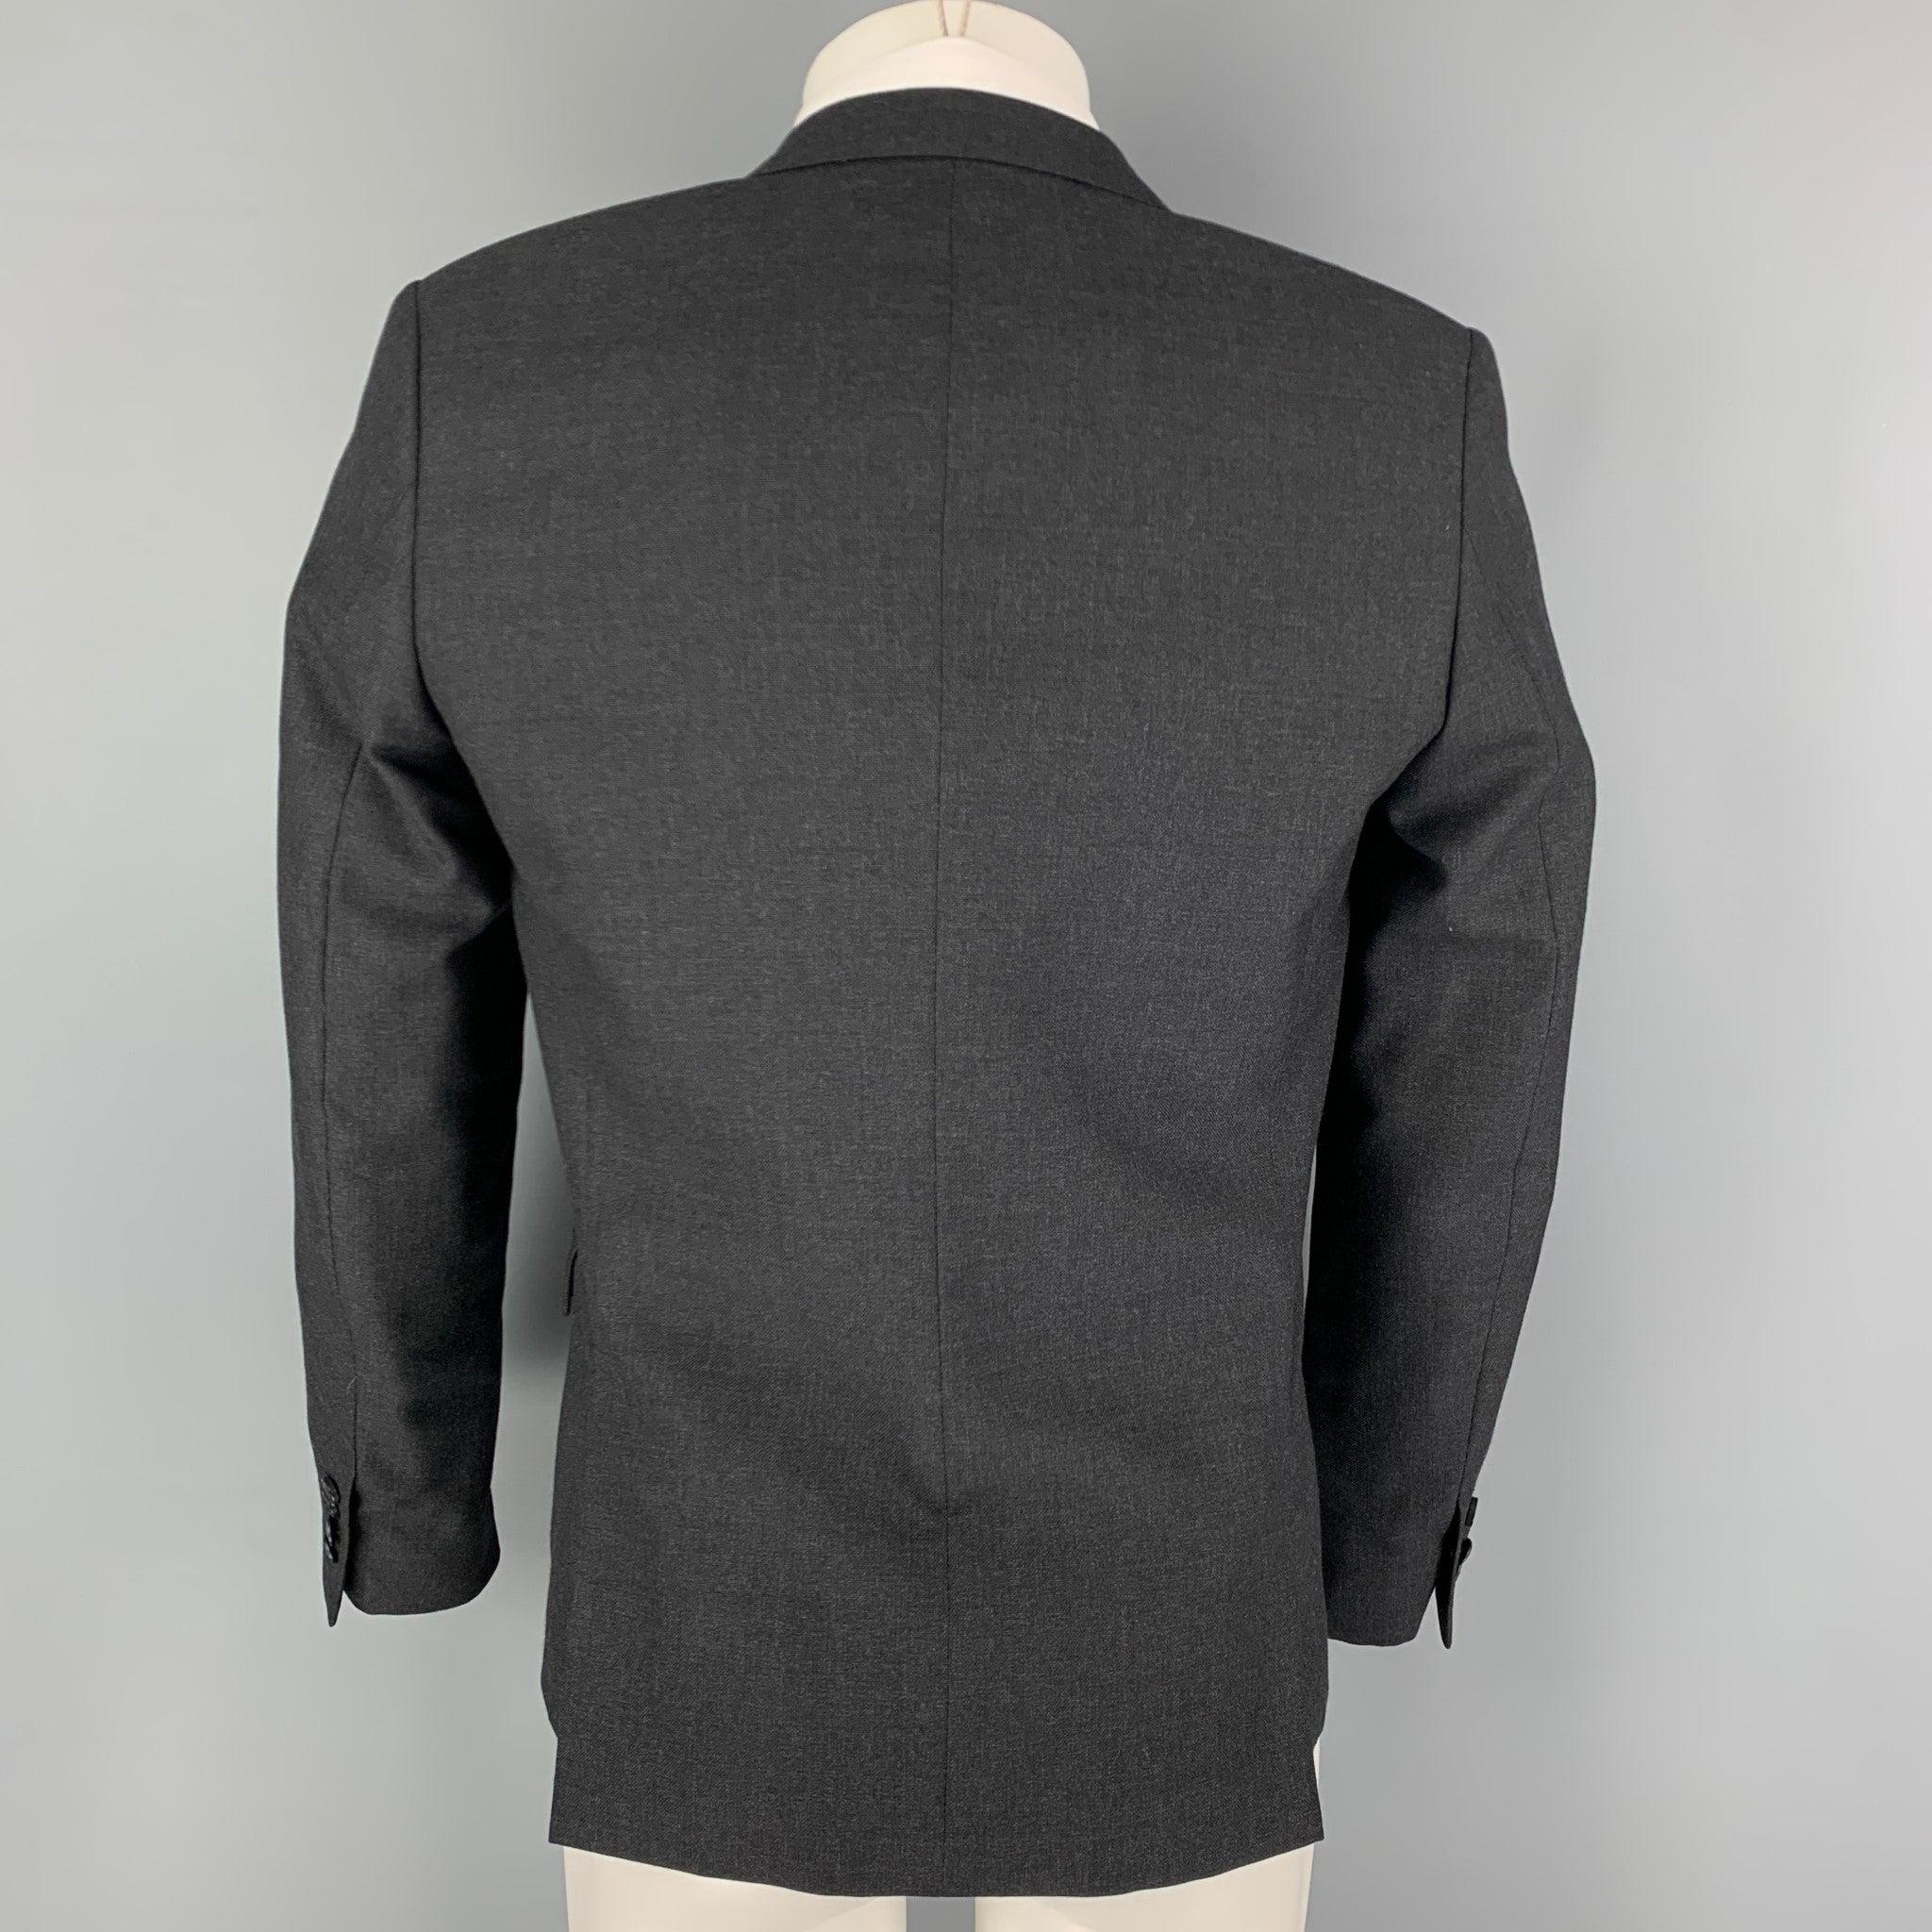 THE KOOPLES Size 36 Charcoal Wool Peak Lapel Sport Coat In Good Condition For Sale In San Francisco, CA